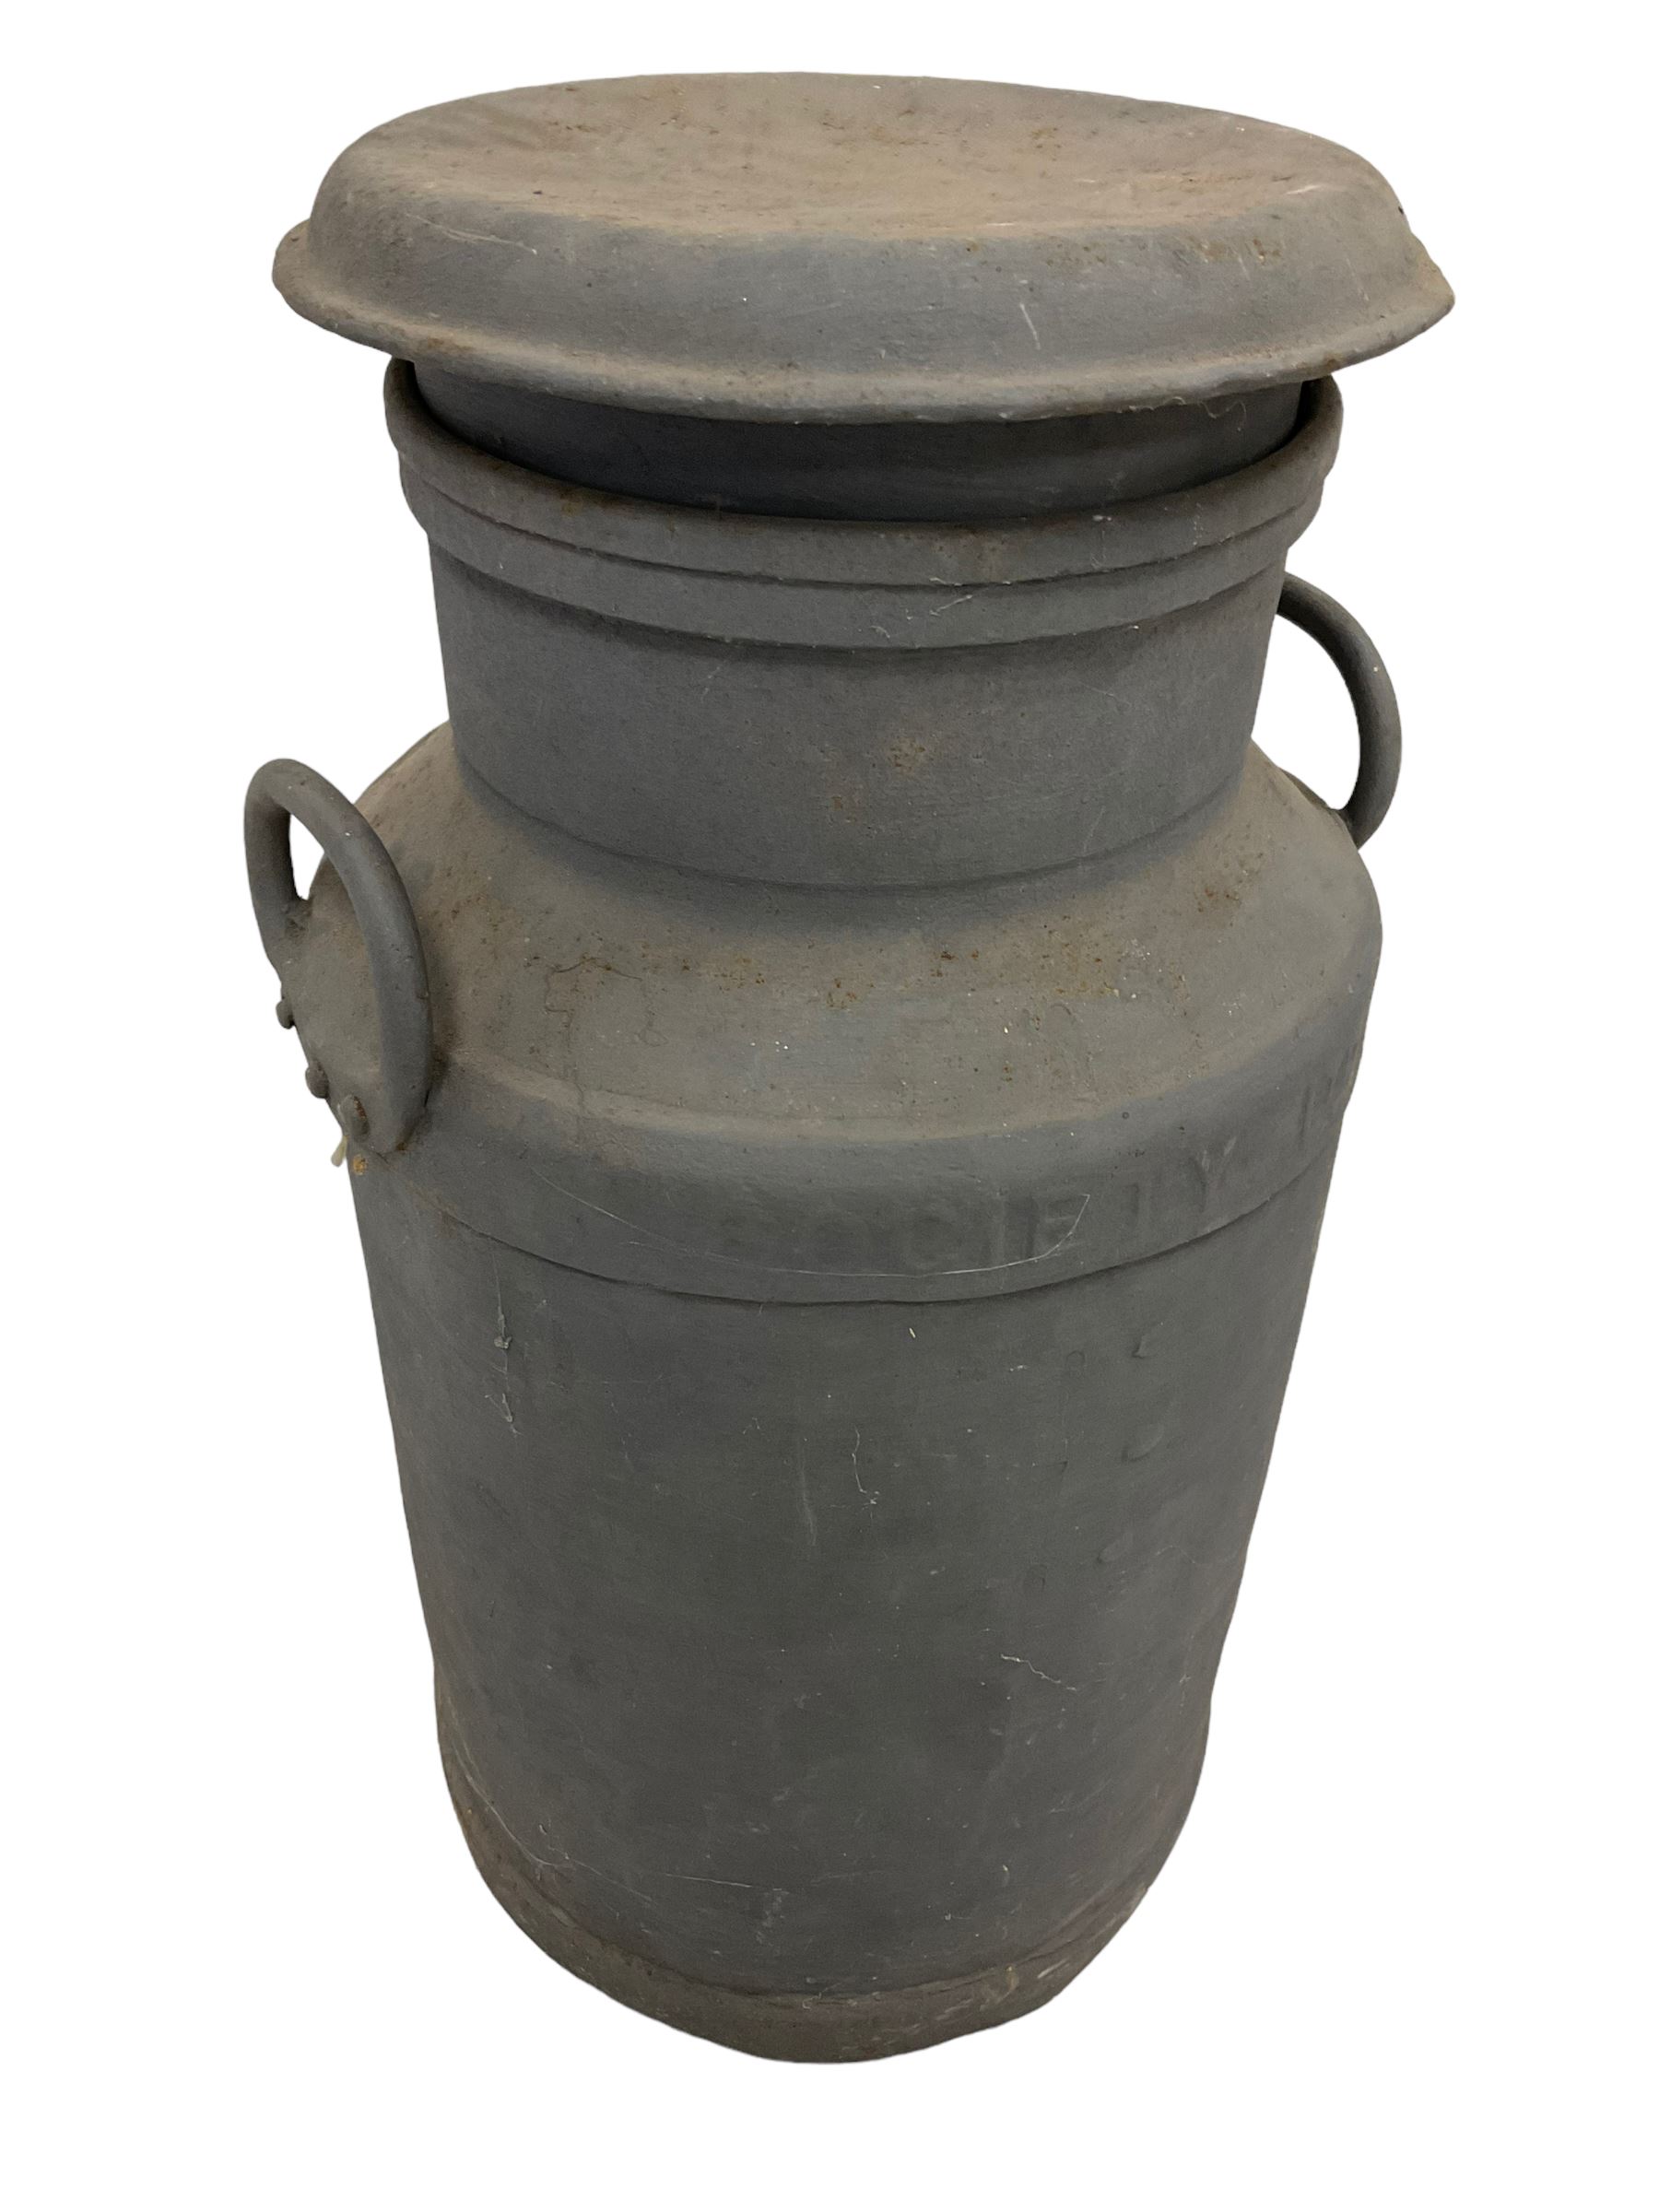 Co-op Wholesale Society Ltd - milk churn with lid and twin handles - Image 3 of 4